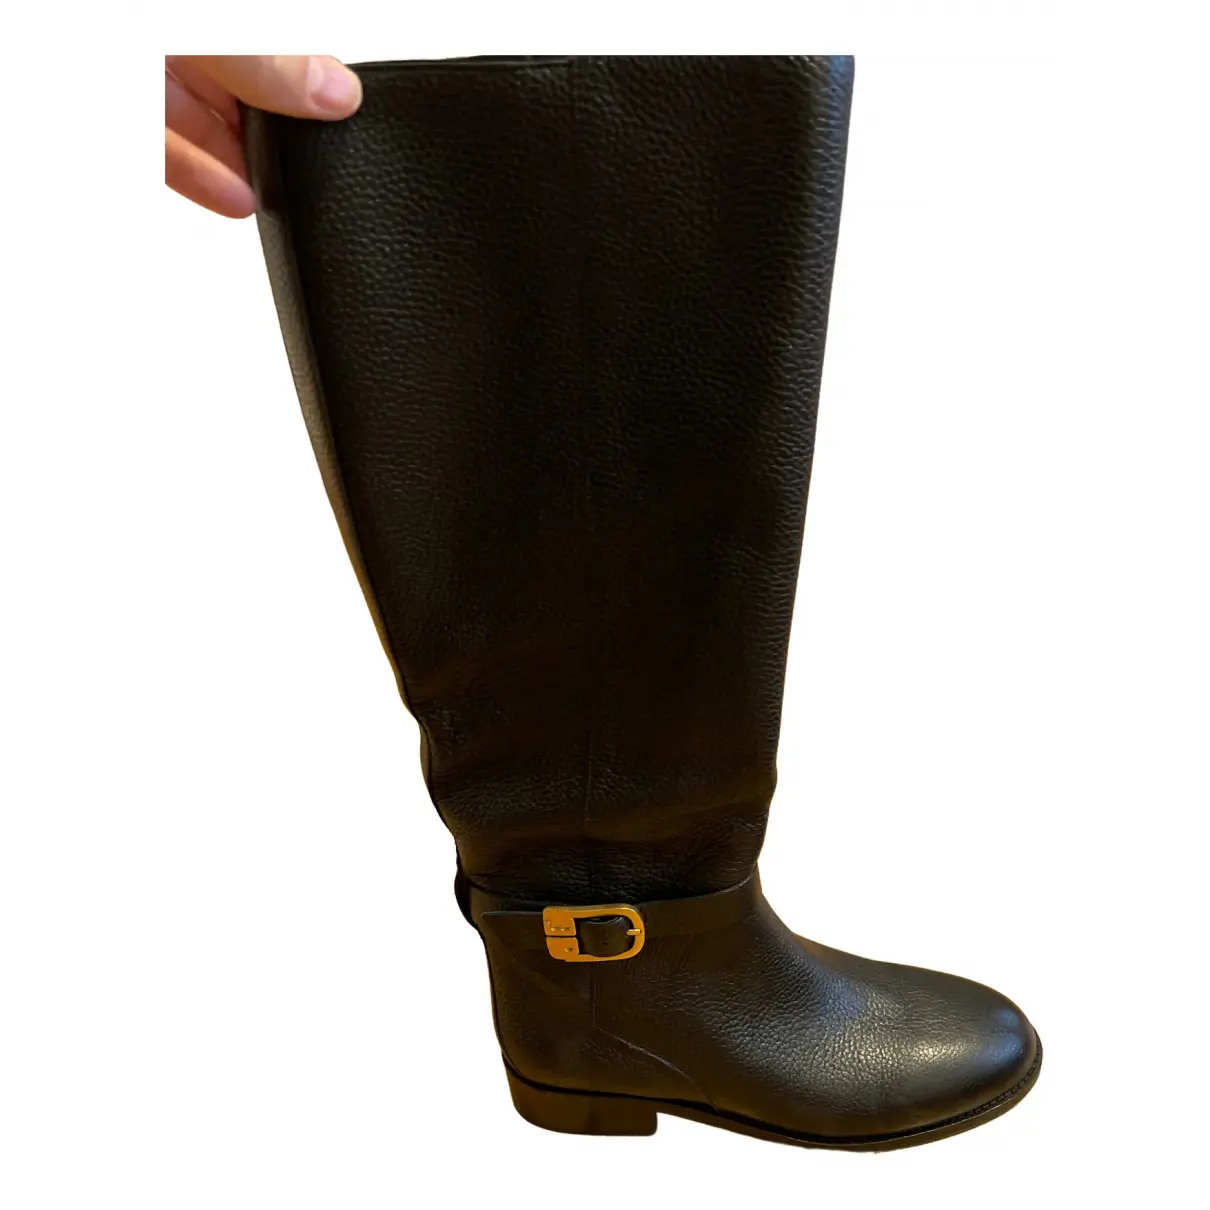 Leather boots Tory Burch